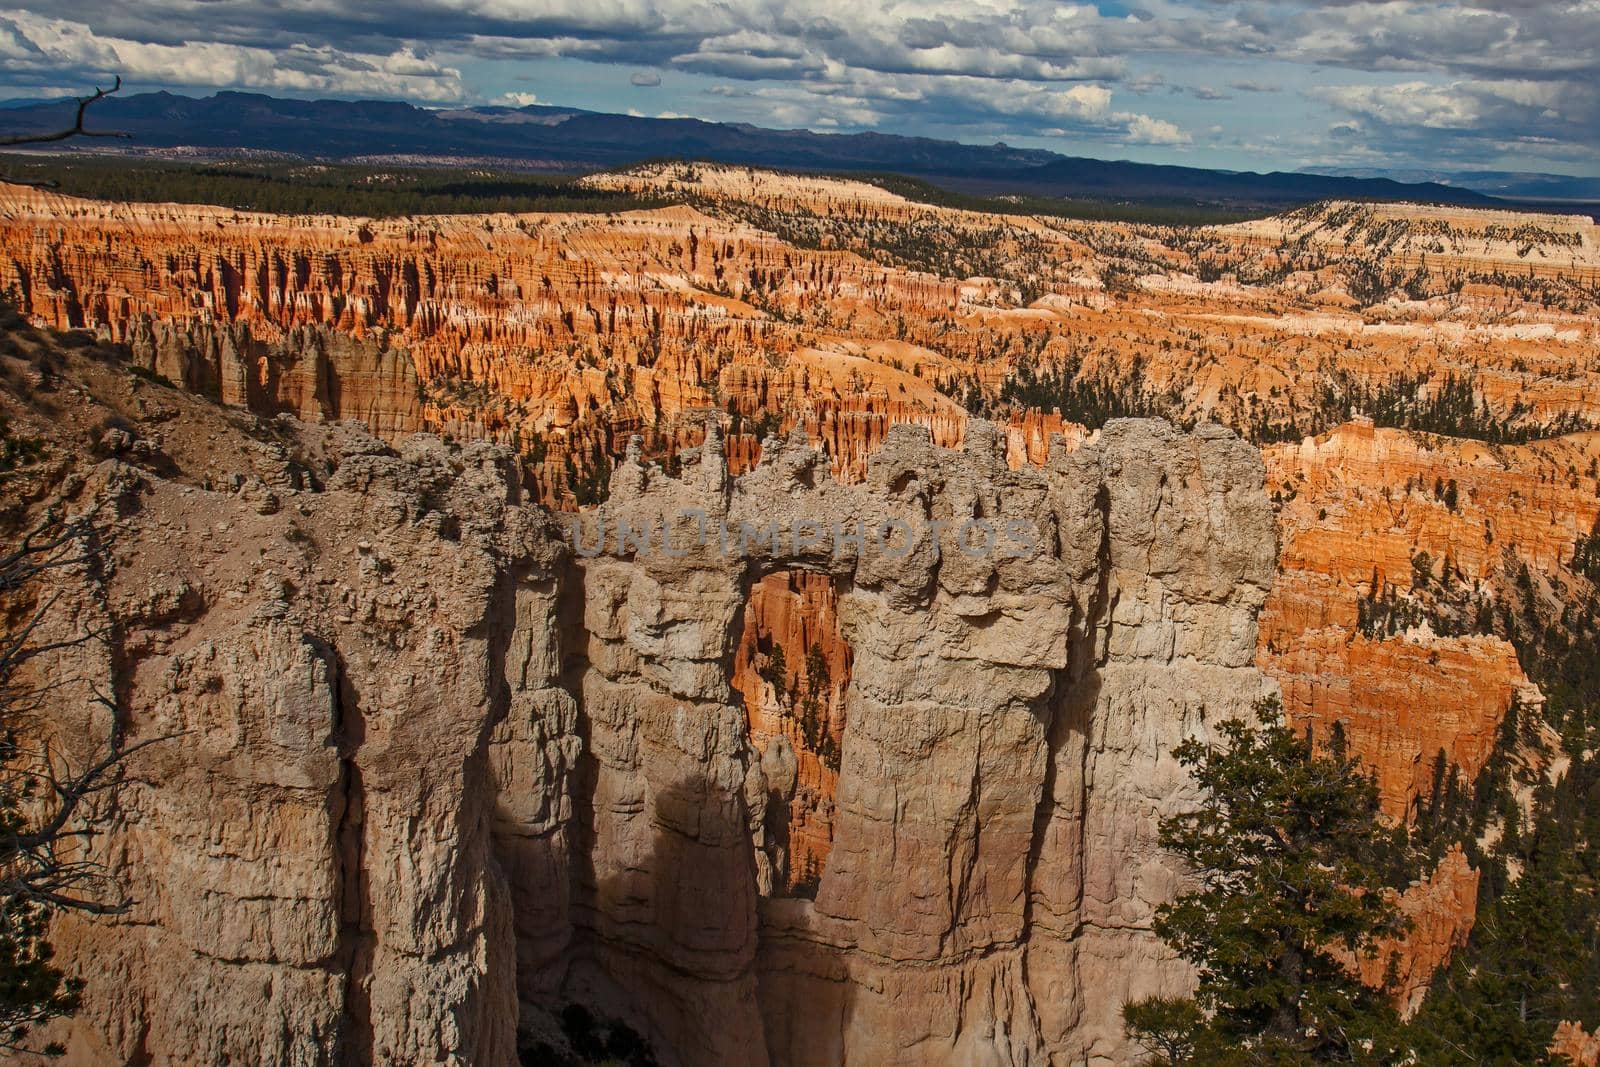 View over Bryce Canyon National Park Utah from the Rim Trail,